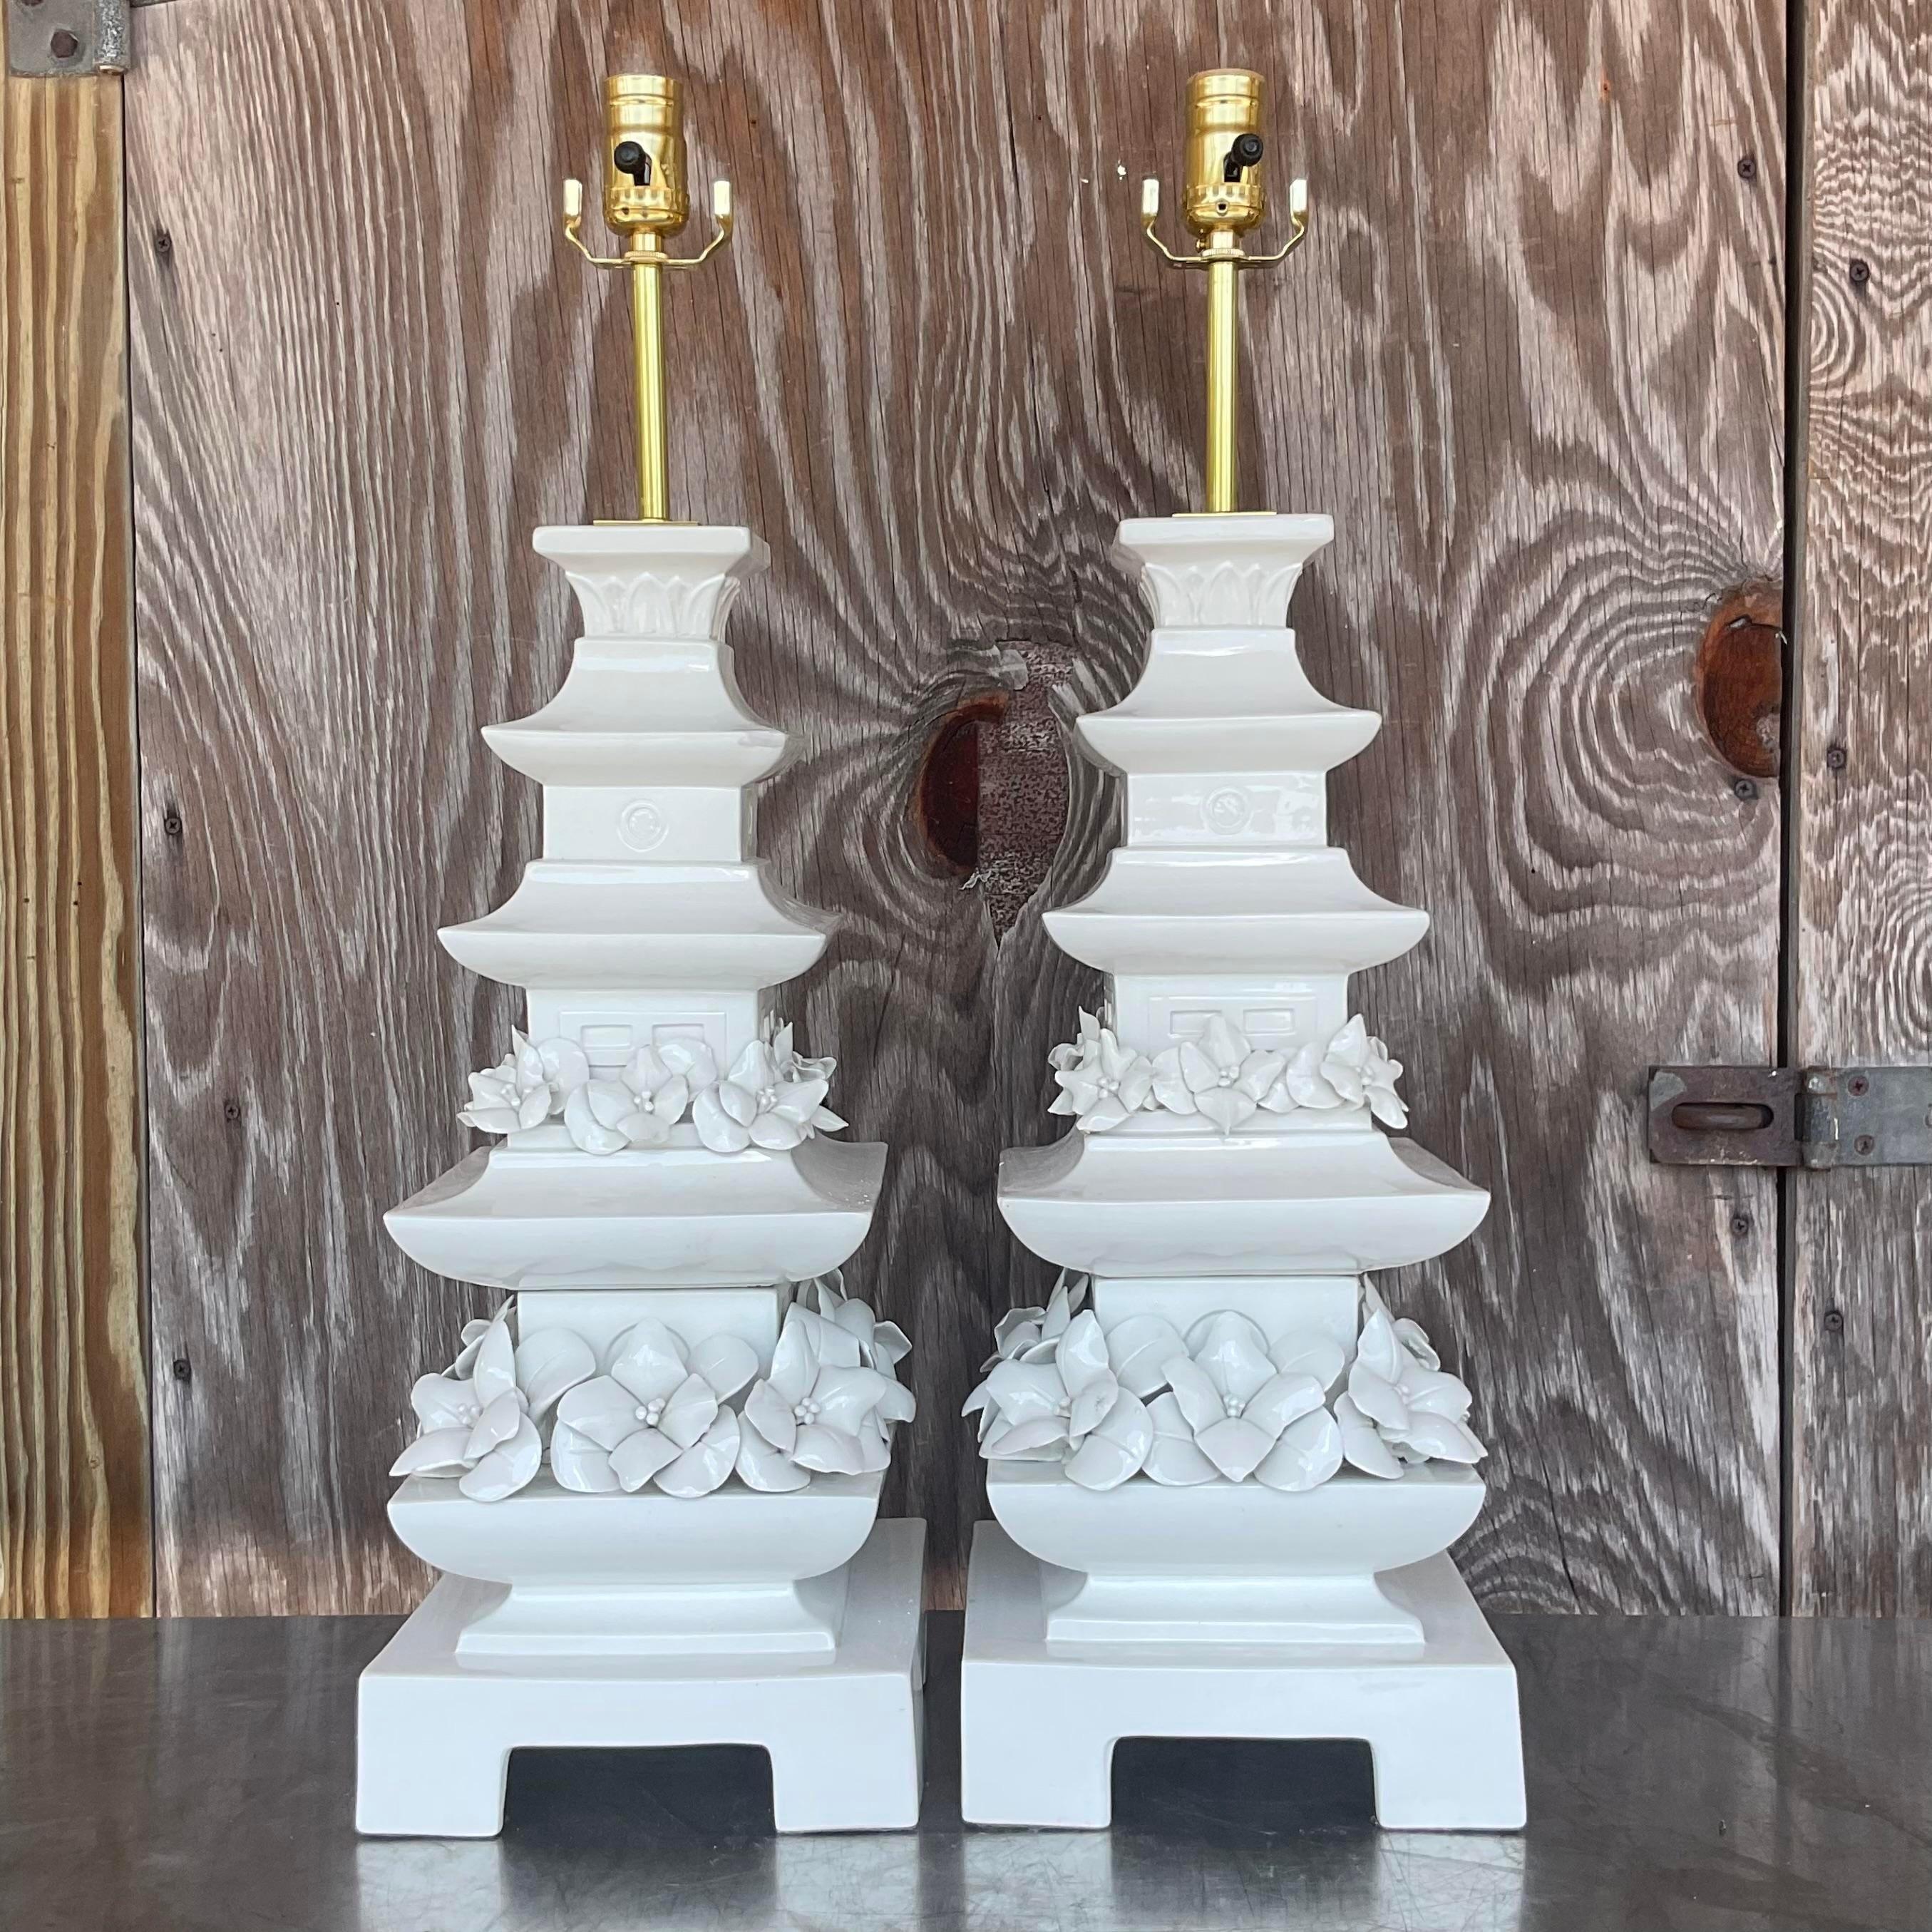 A fabulous pair of vintage Asian table lamps. A chic original glazed ceramic finish in a classic Pagoda shape. Fully restored with all new hardware and wiring. Acquired from a Palm Beach estate.